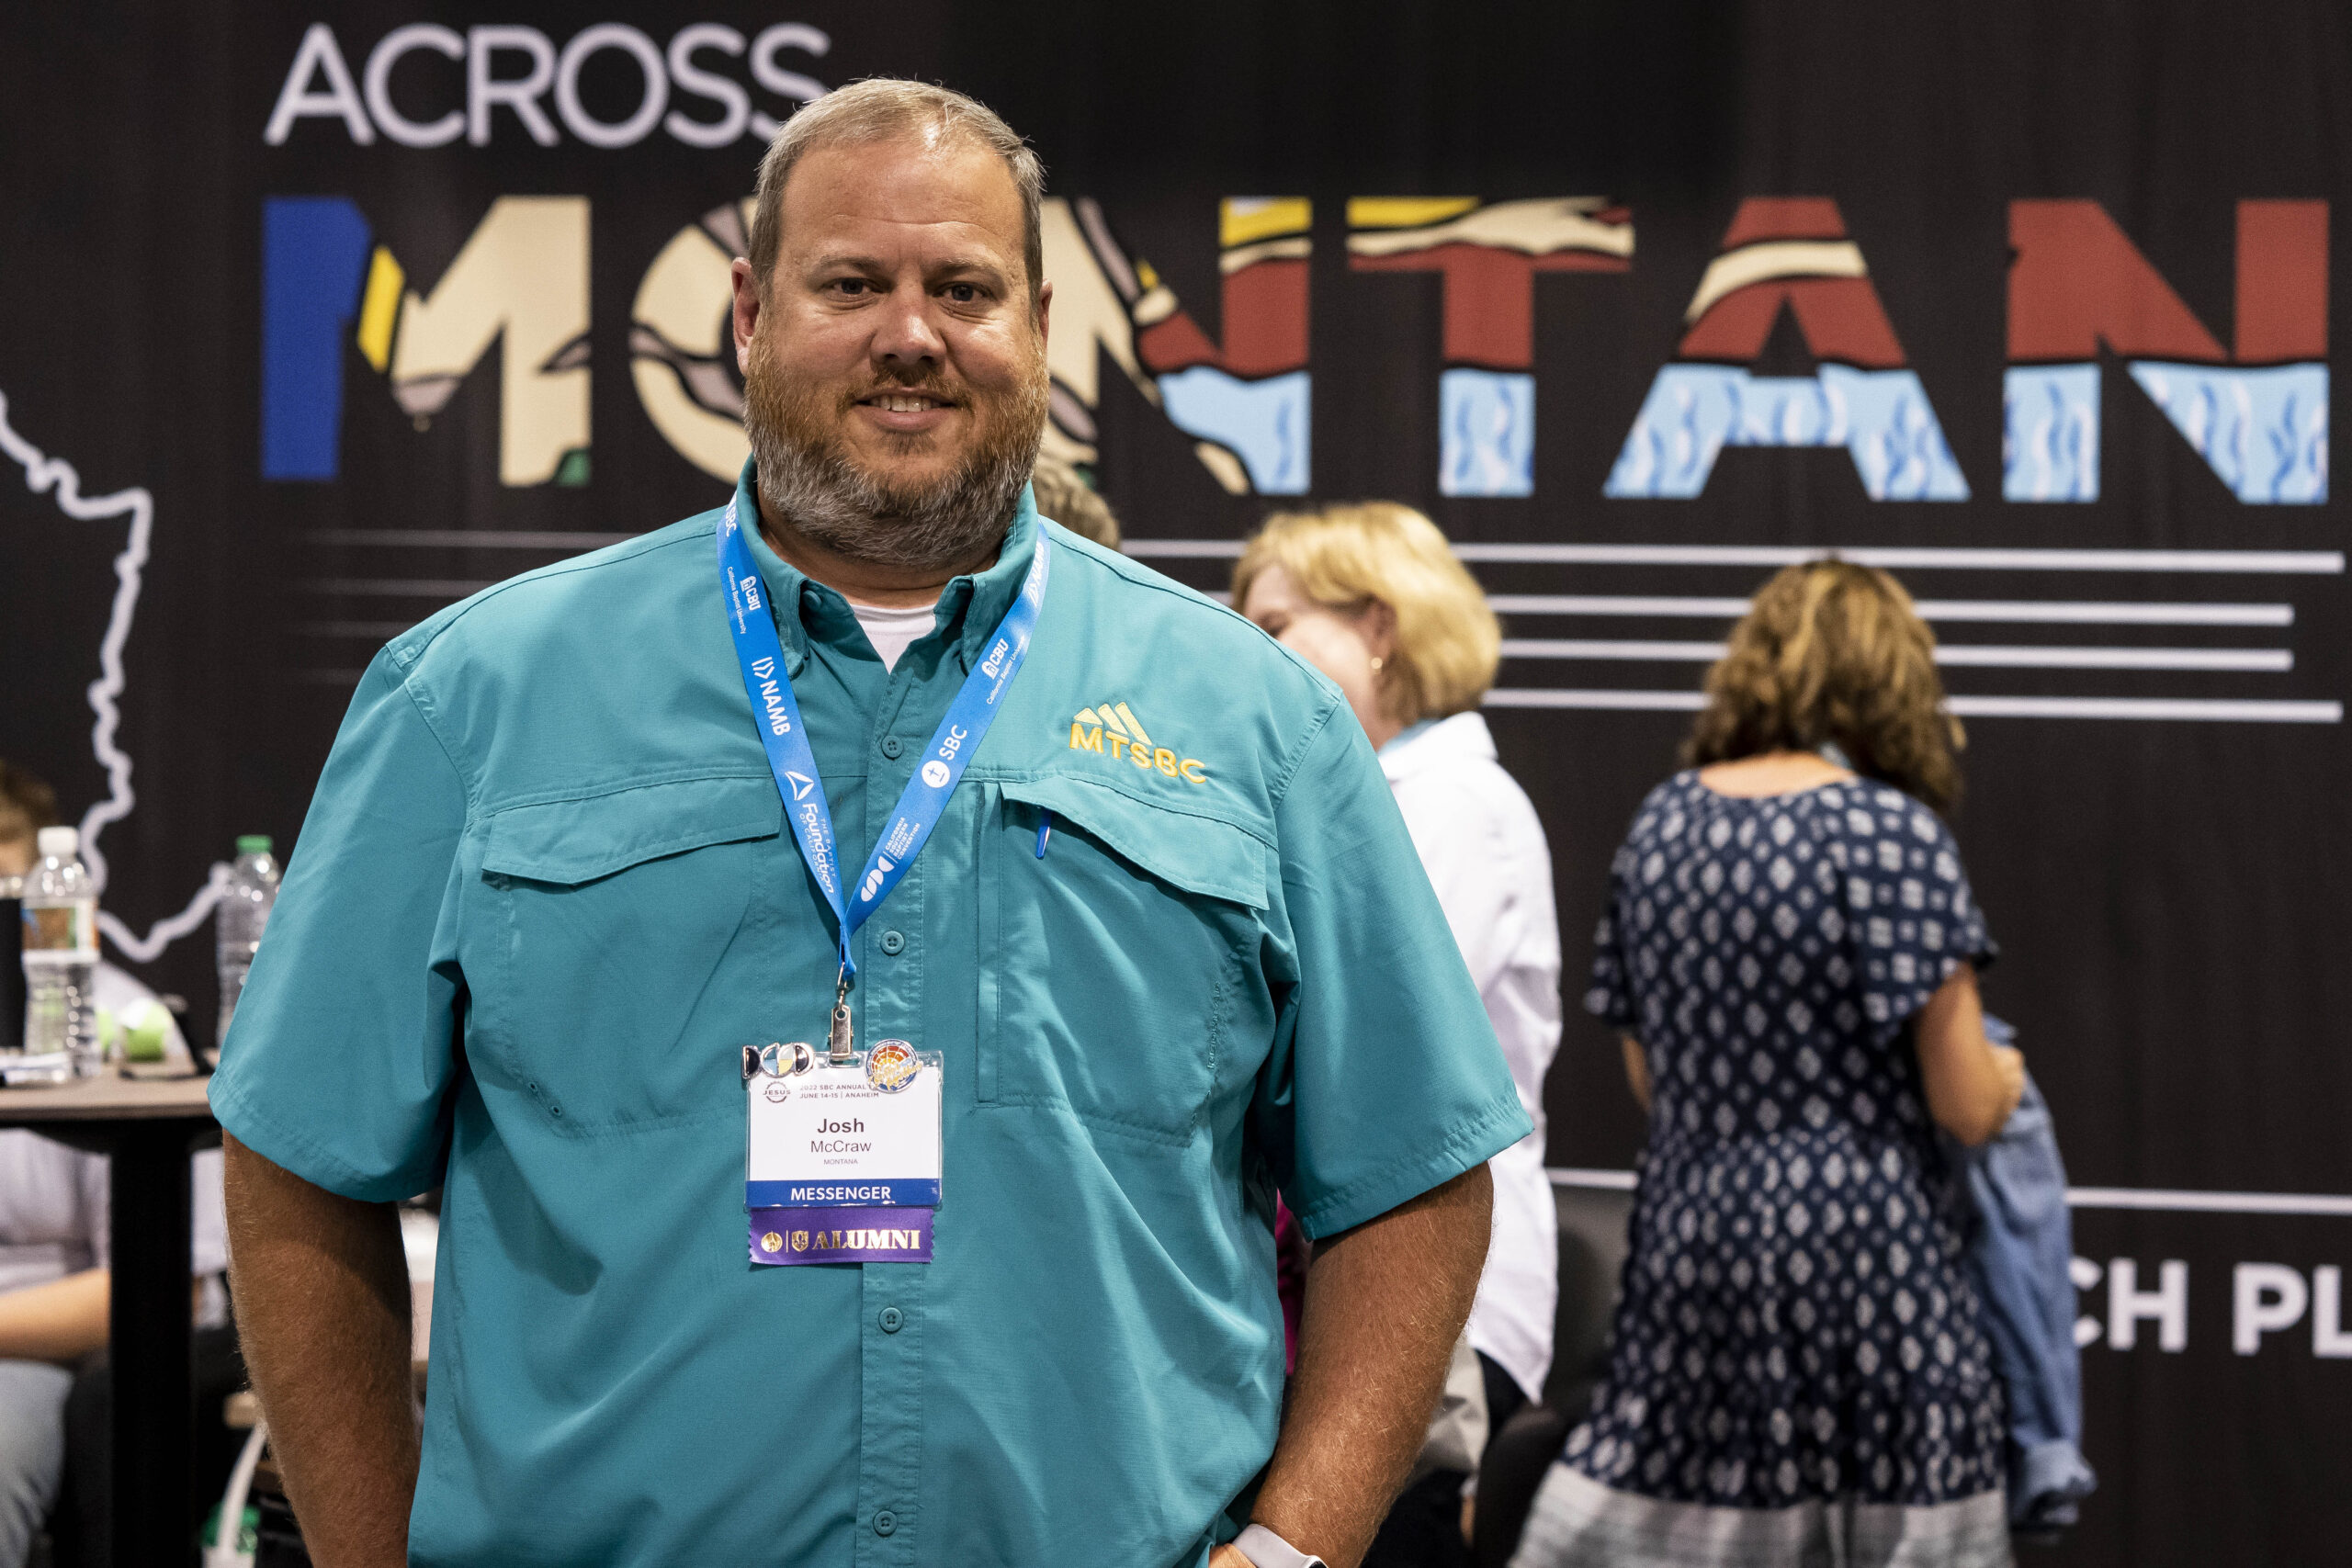 Josh McGraw stands for a portrait at the Plant Montana booth at the Southern Baptist Convention annual meeting, held at the Anaheim Convention Center in Anaheim, California, on Wednesday, June 15, 2022. Photo by Justin L. Stewart/Religion News Service